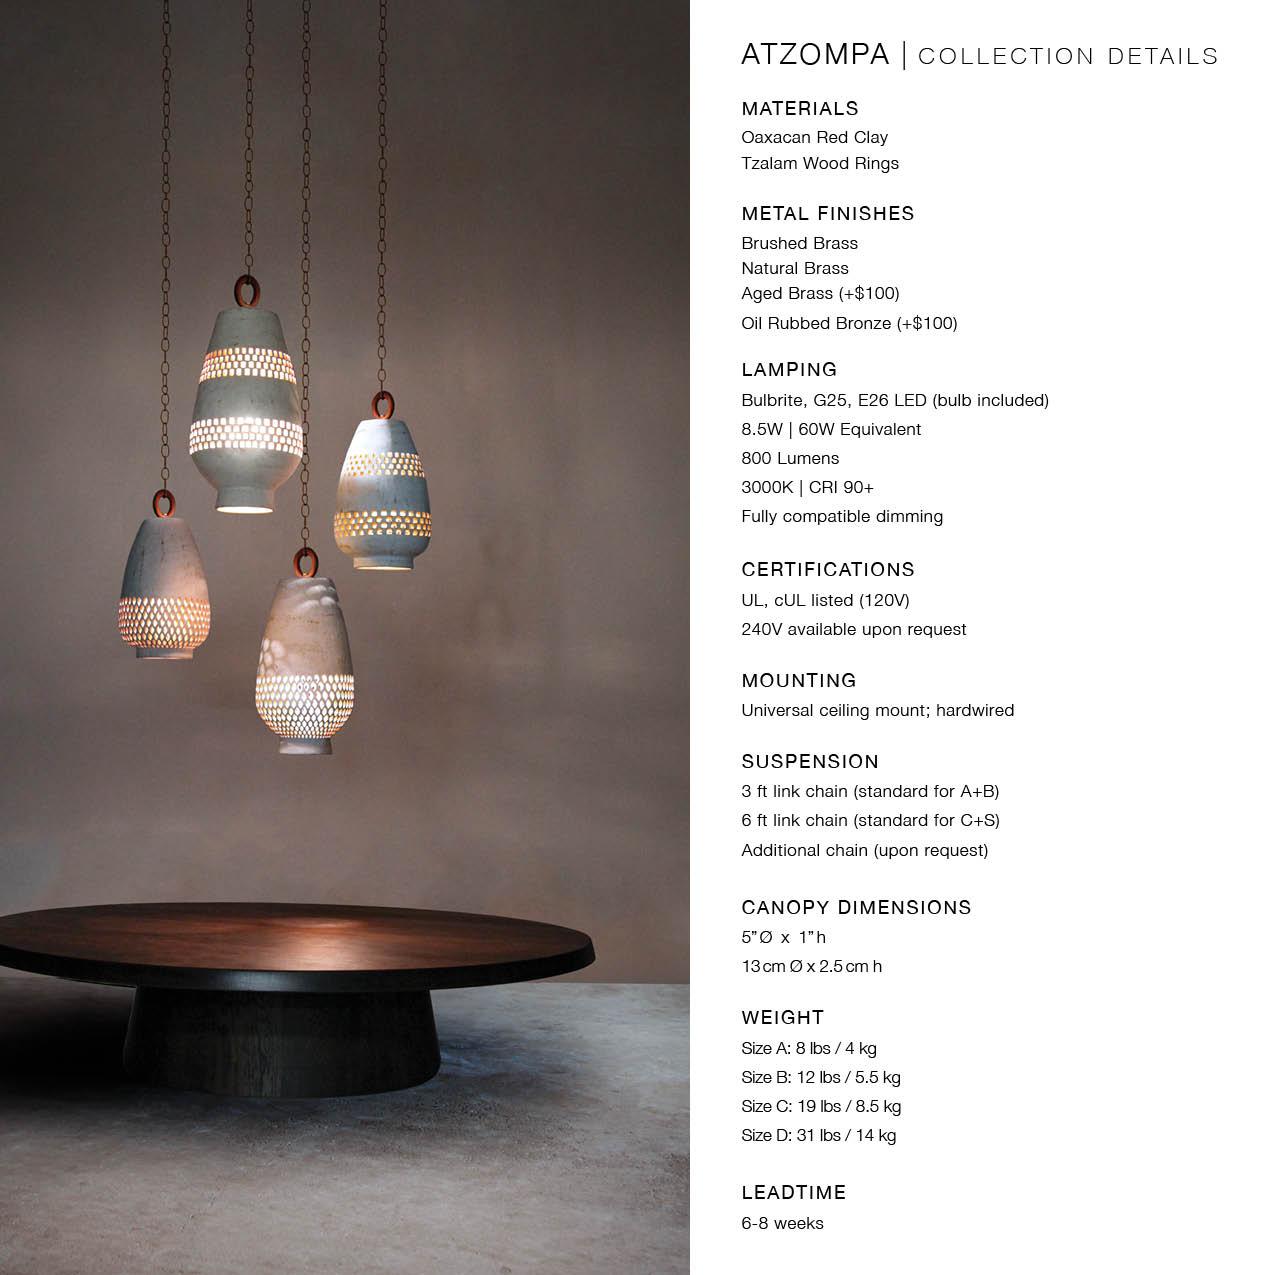 White Ceramic Pendant Light XL, Oiled Bronze, Diamantes Atzompa Collection In New Condition For Sale In New York, NY